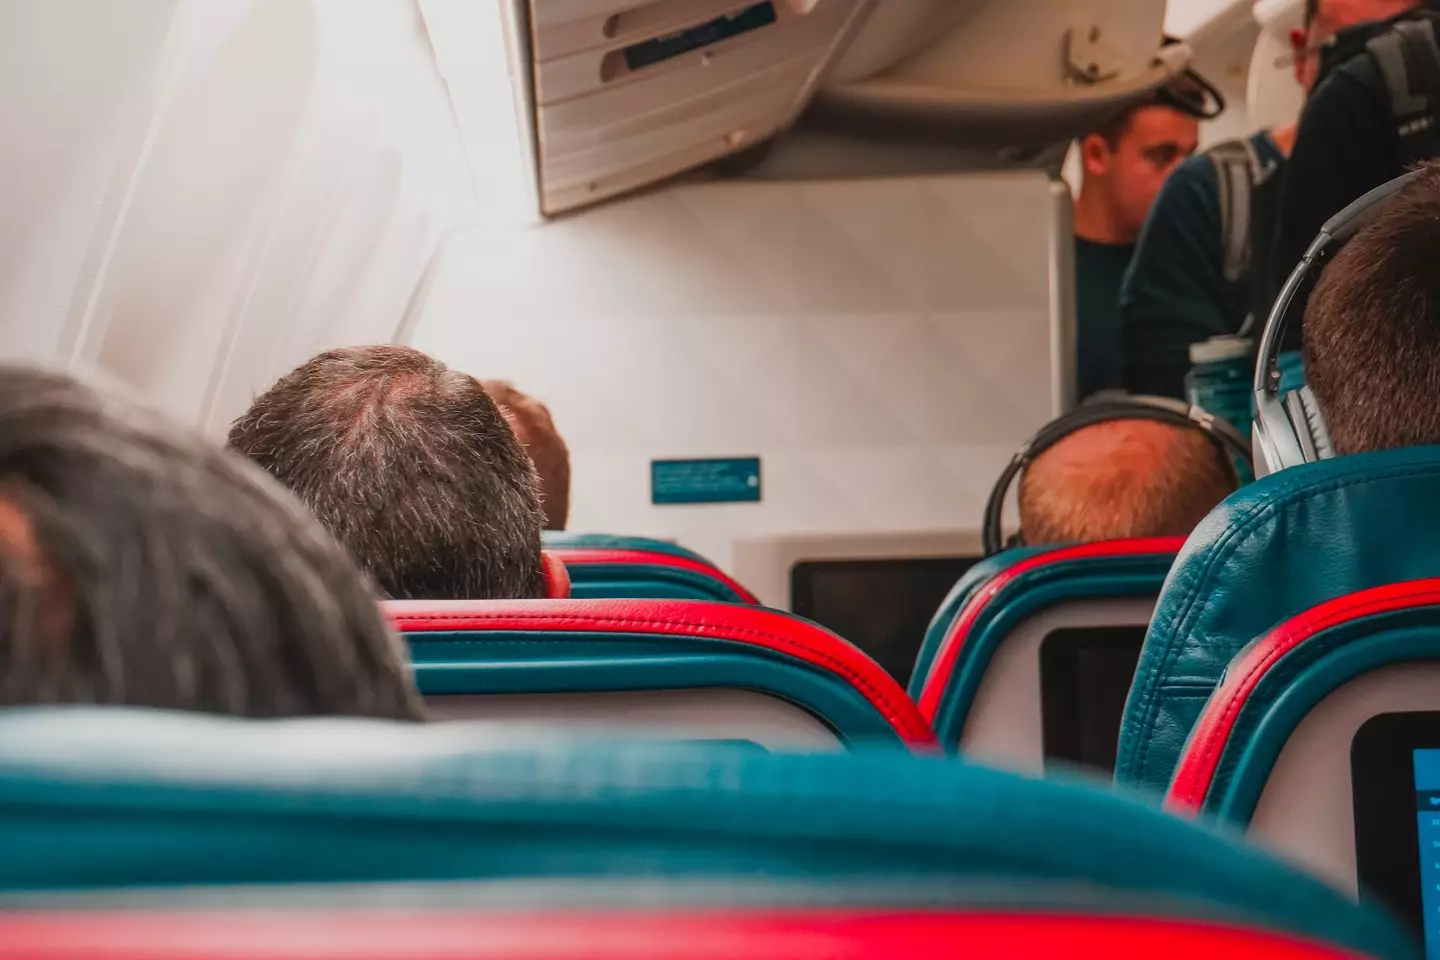 The man claimed he could still hear the woman two seats away with earplugs.